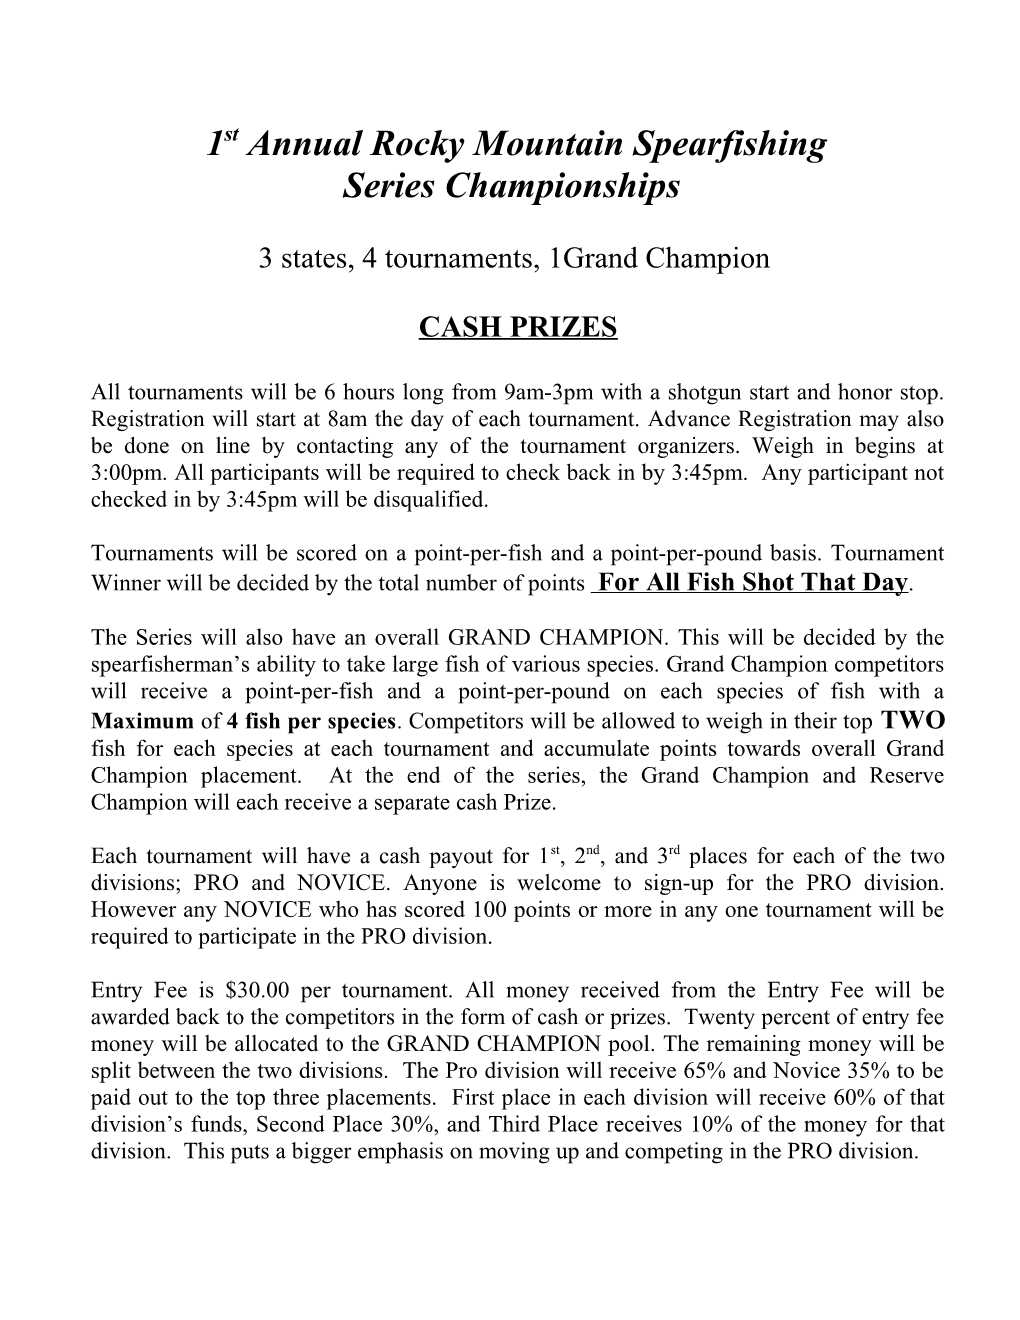 1St Annual Rocky Mountain Spear Fishing Series Championships